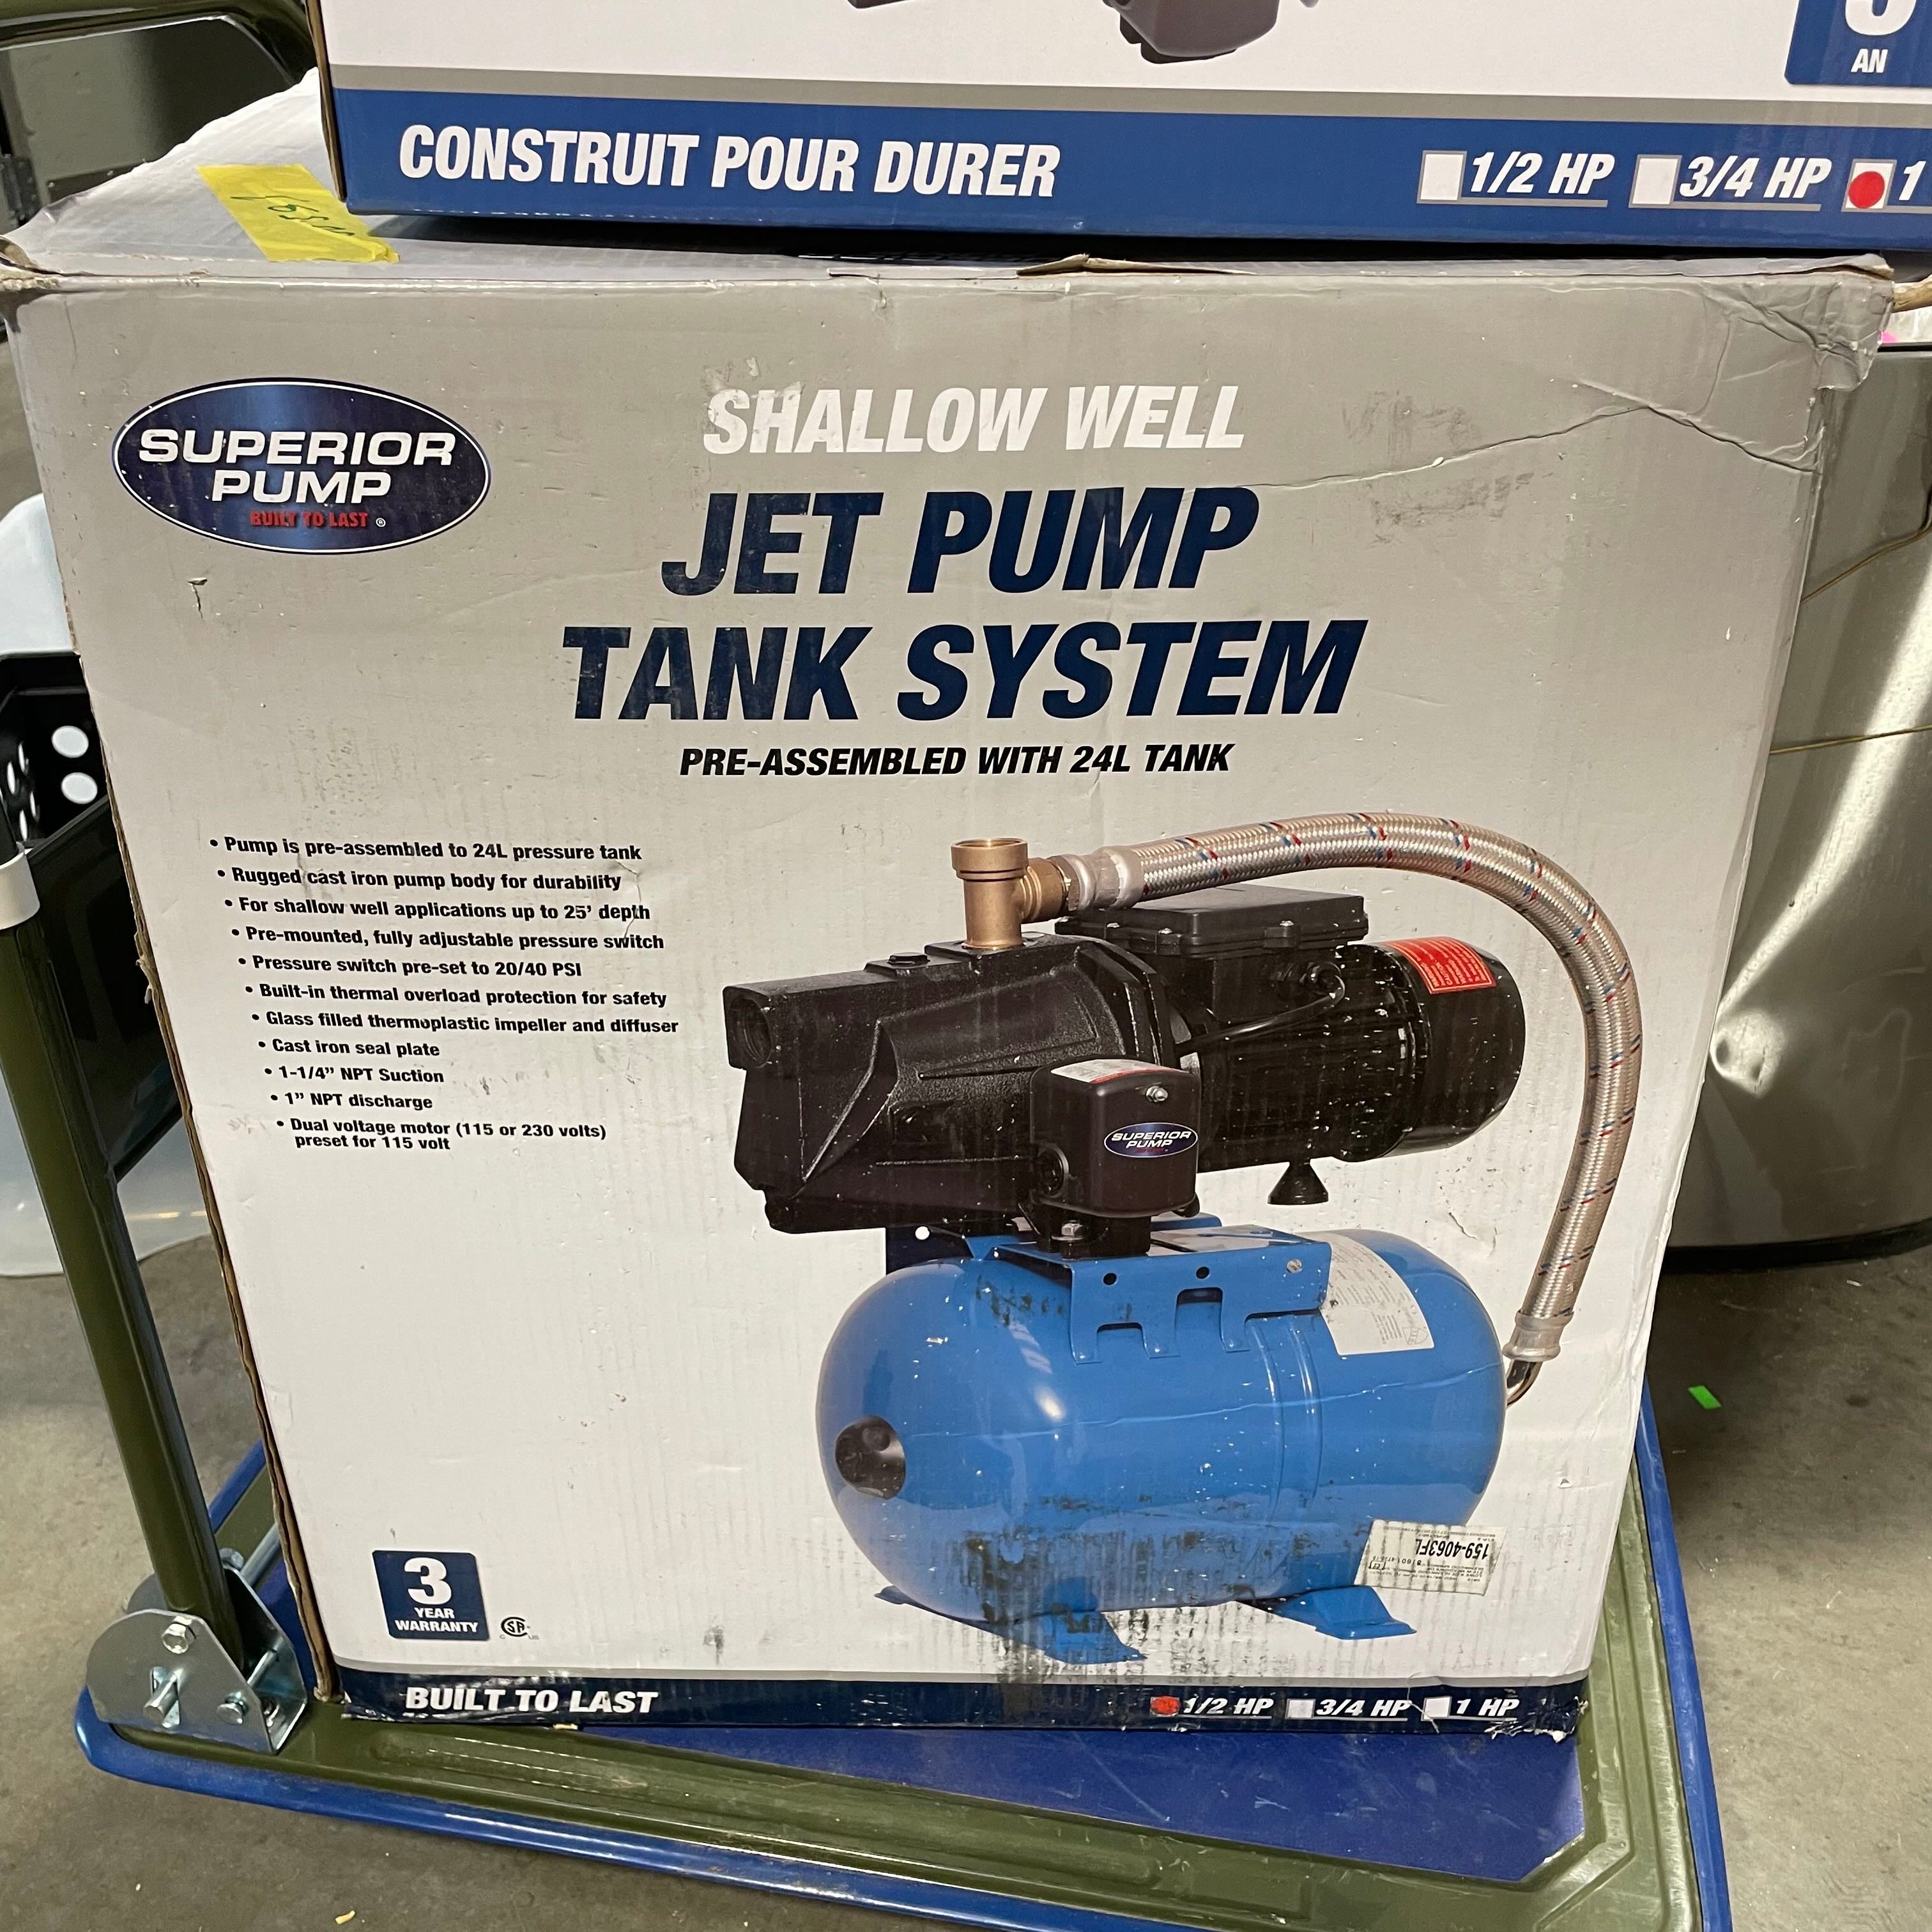 1/2 HP Pre-Assembled with 24L Tank Shallow Well Jet Pump Tank System